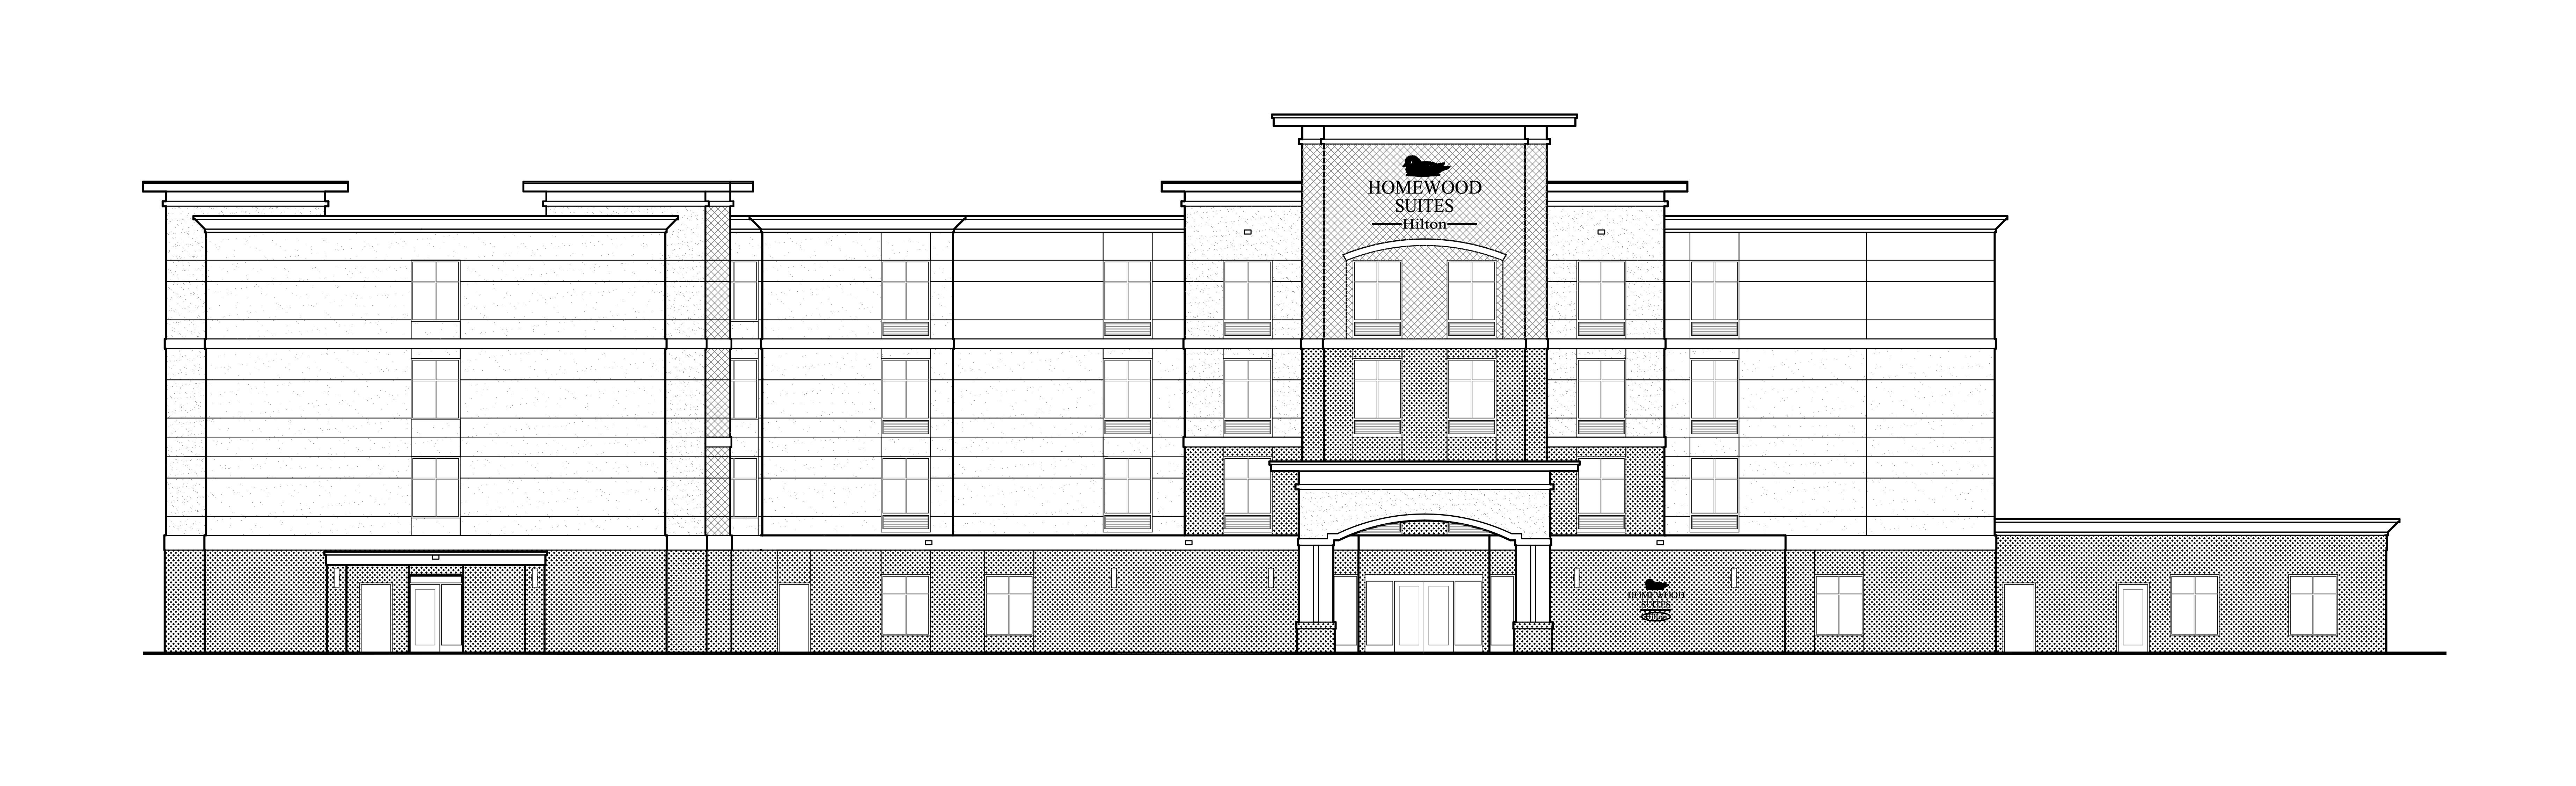 Construction To Begin On New Homewood Suites 48 Acre Site